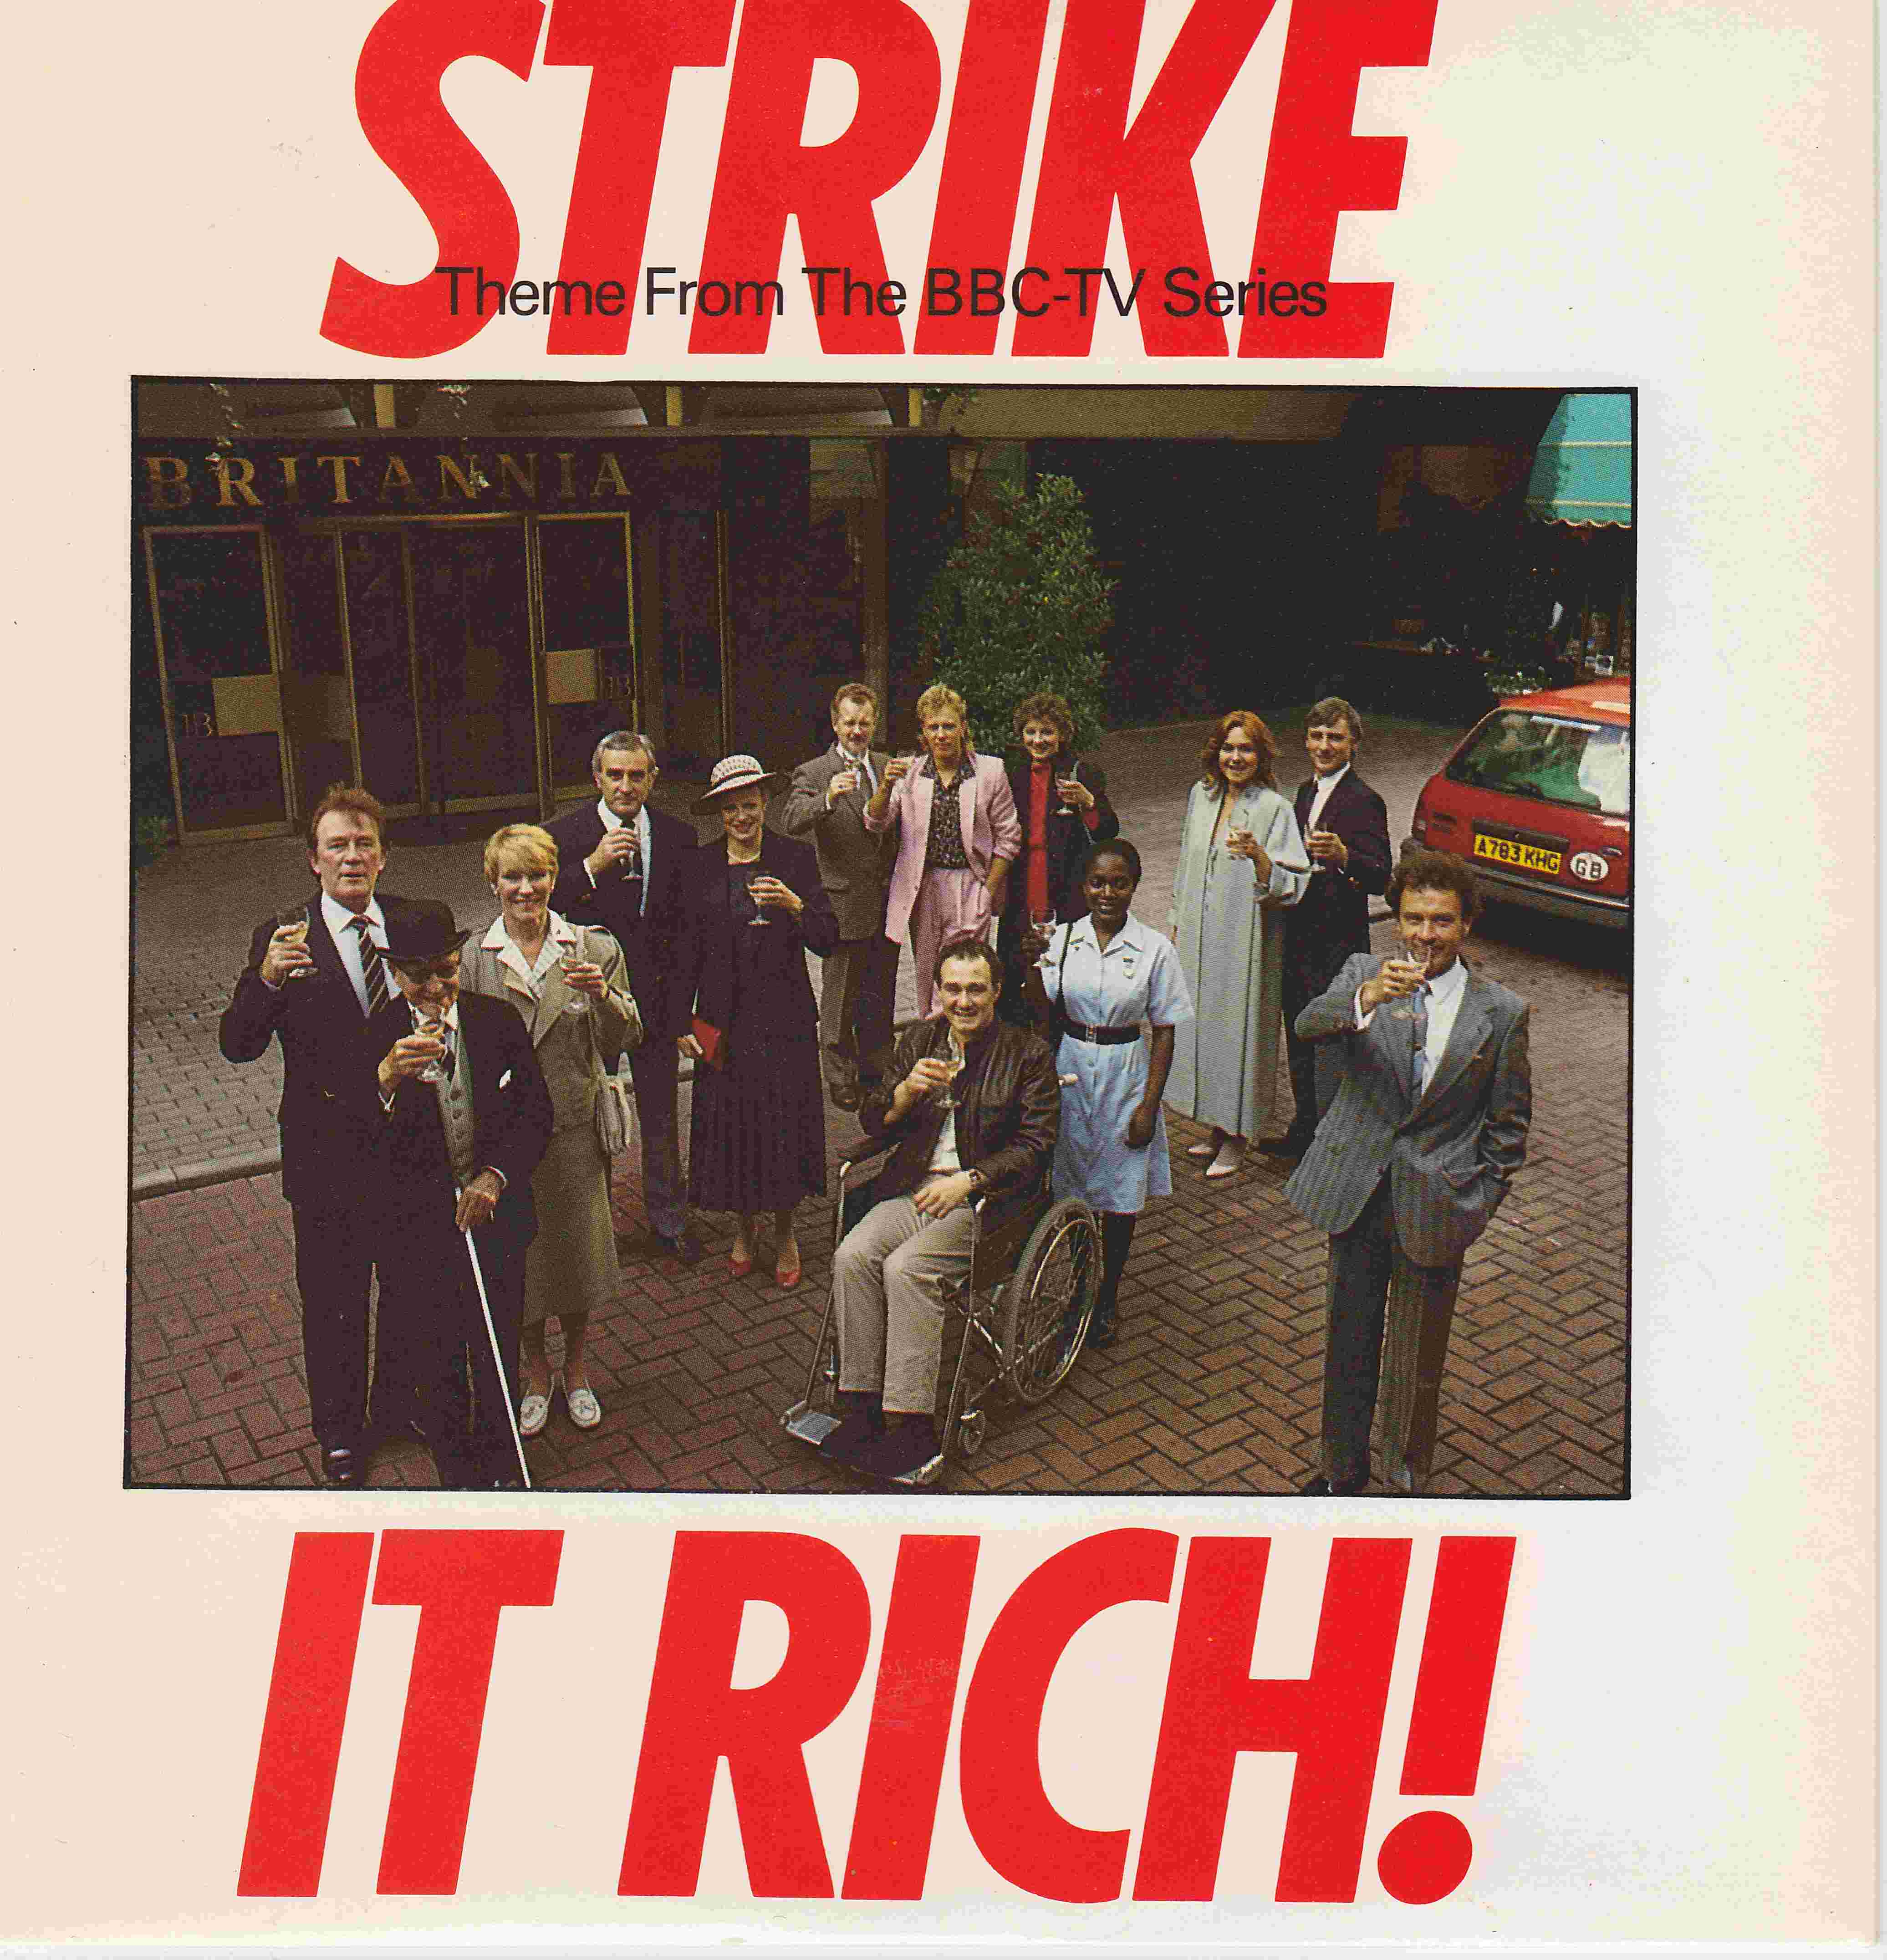 Picture of RESL 177 Strike it rich by artist David Mildel / 
Mills and McKenna / Francois Trichot from the BBC records and Tapes library